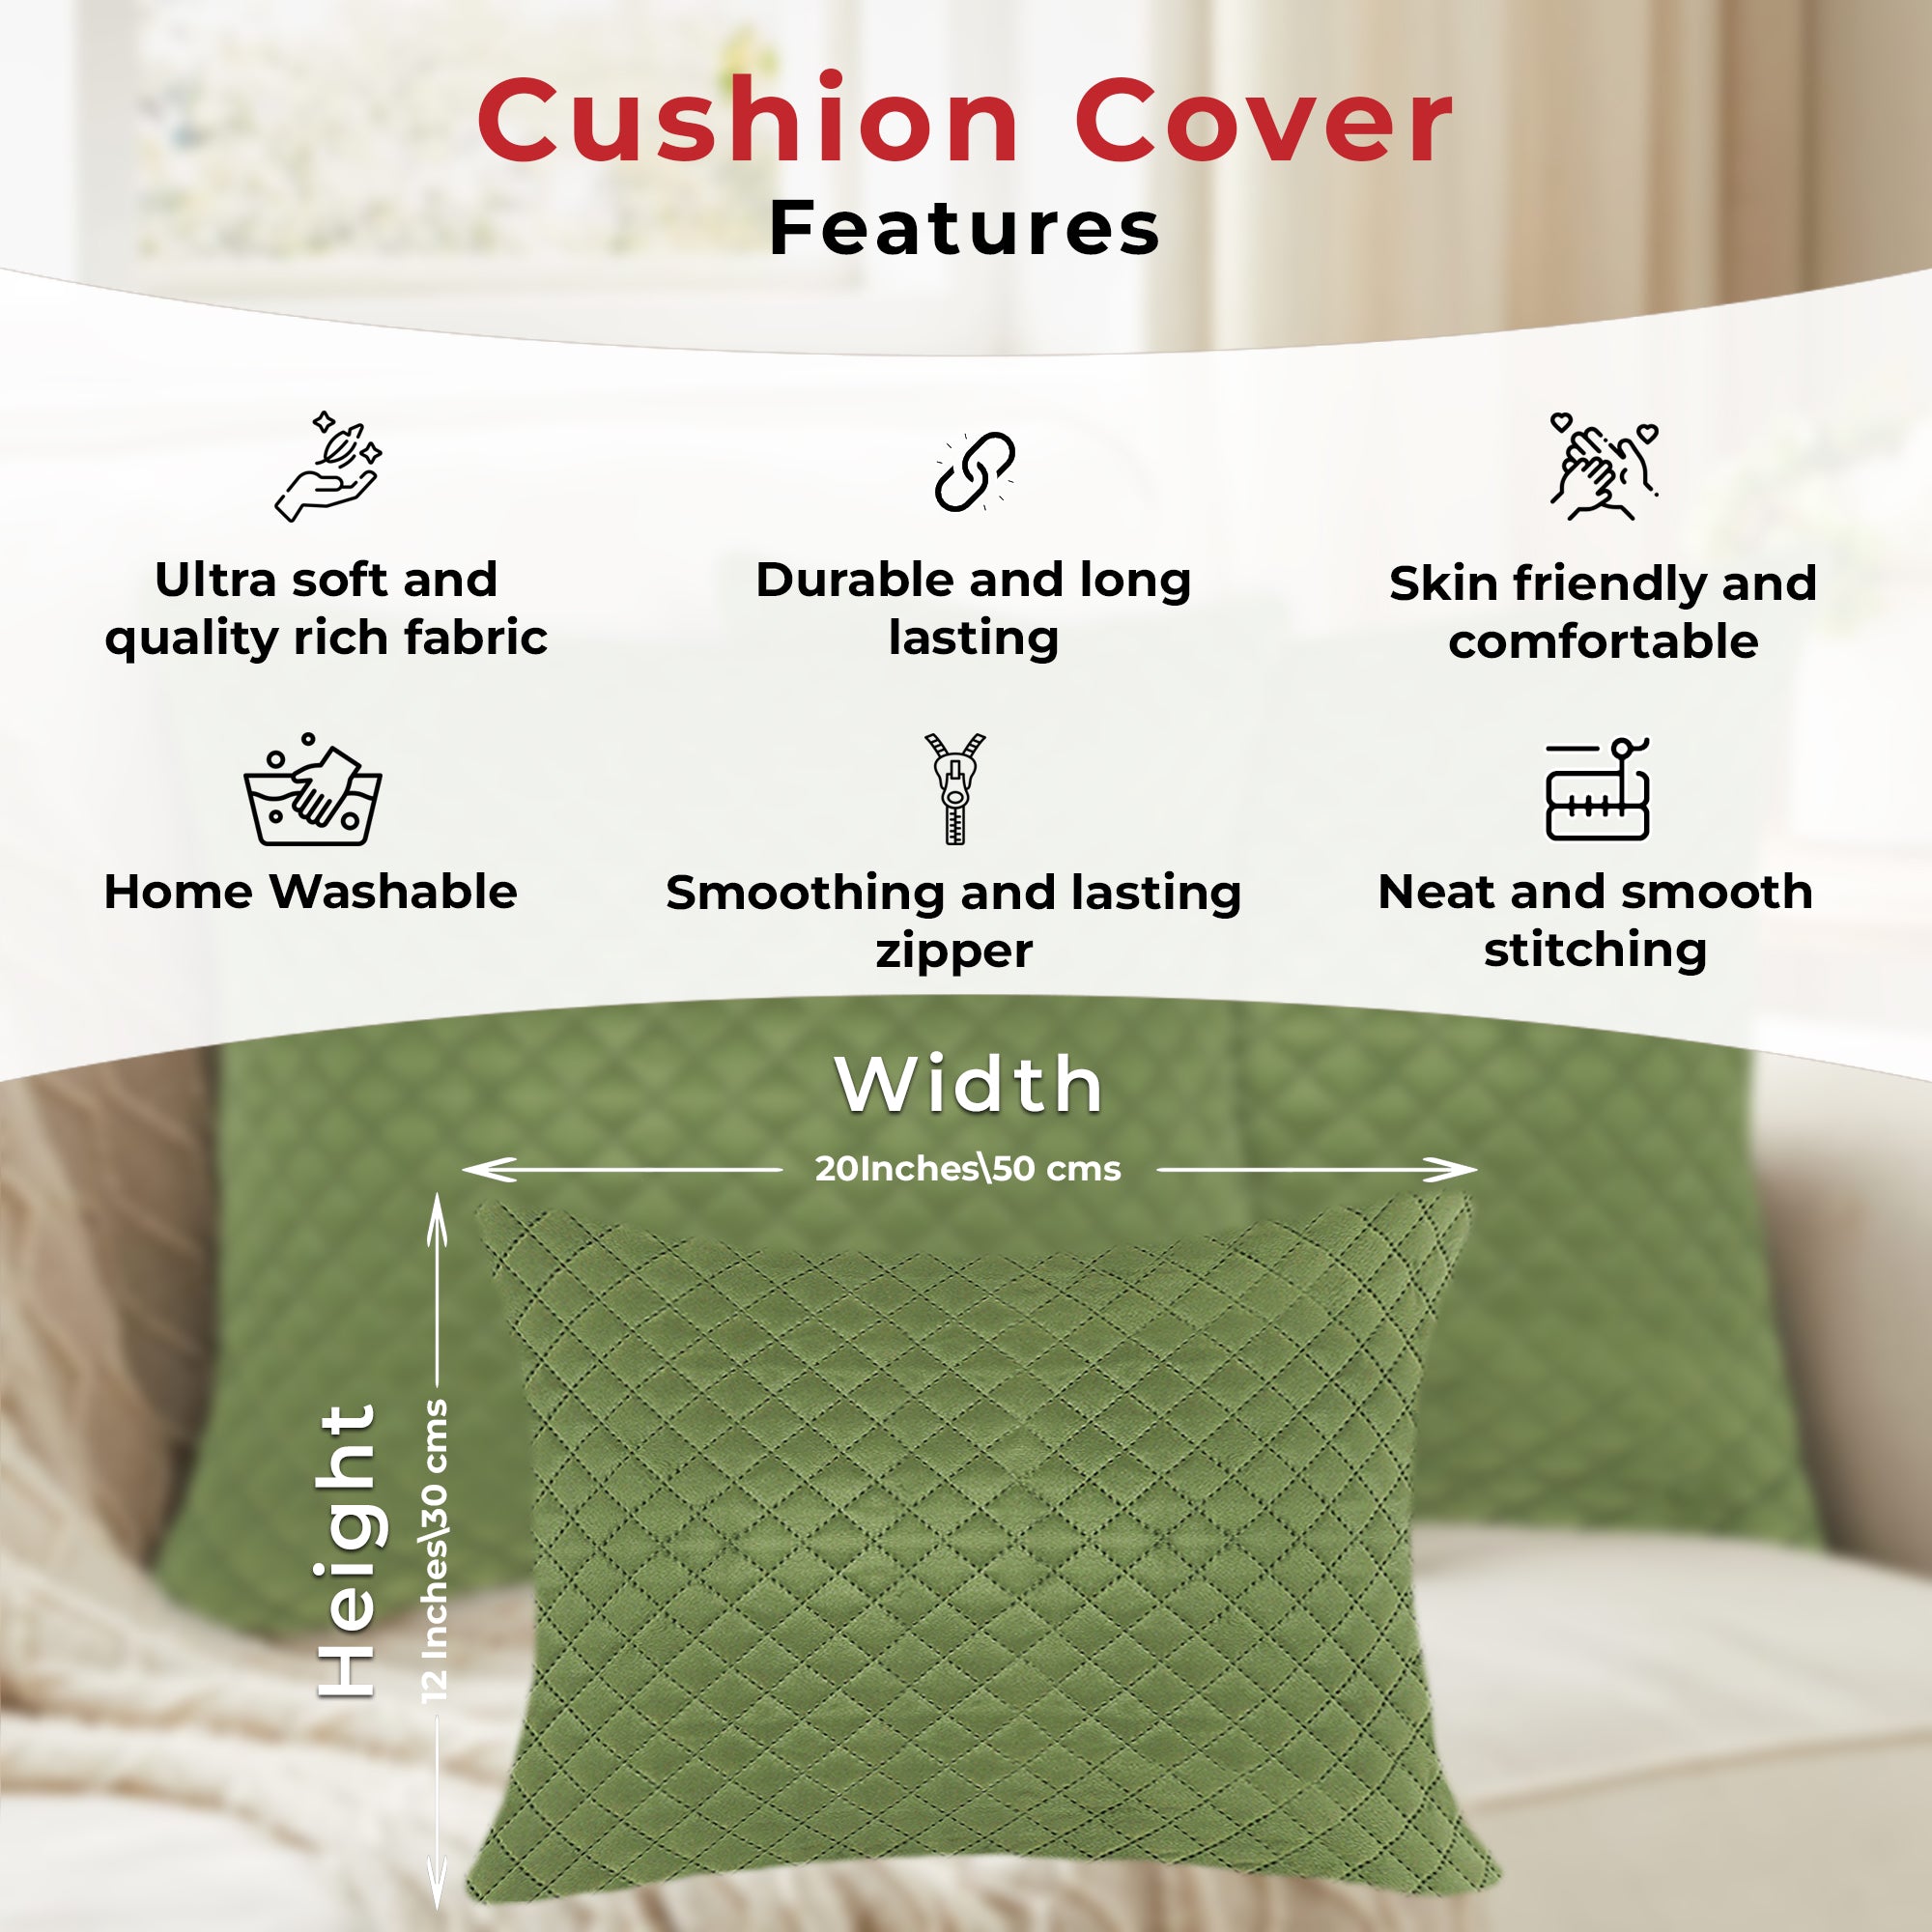 Tesmare Velvet Quilted Cushion Cover,Solid color Throw Pillow Case for Home Sofa, Pack of 2pcs,Green